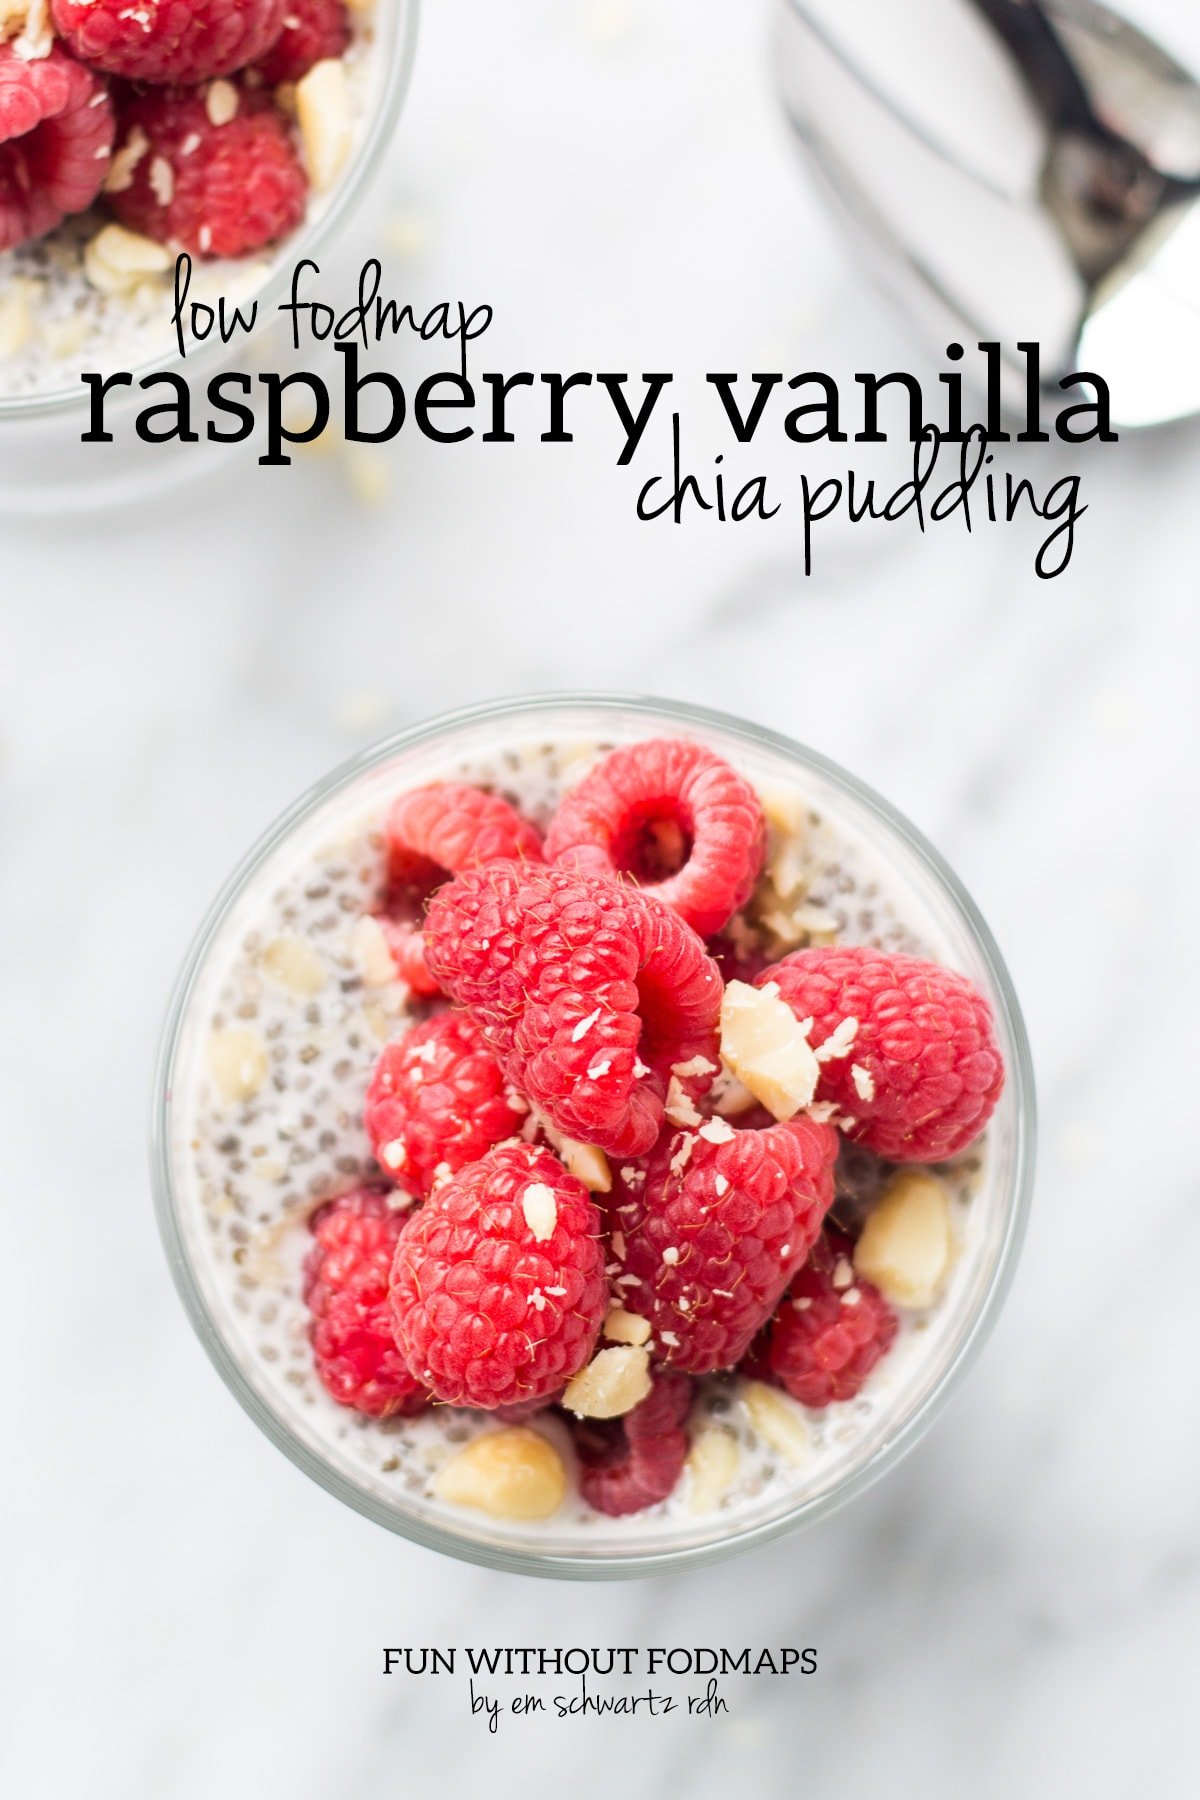 Looking down at a cup filled with chia pudding and topped with fresh raspberries and macadamia nuts. A black text overlay reads "Low FODMAP Raspberry Vanilla Chia Pudding"